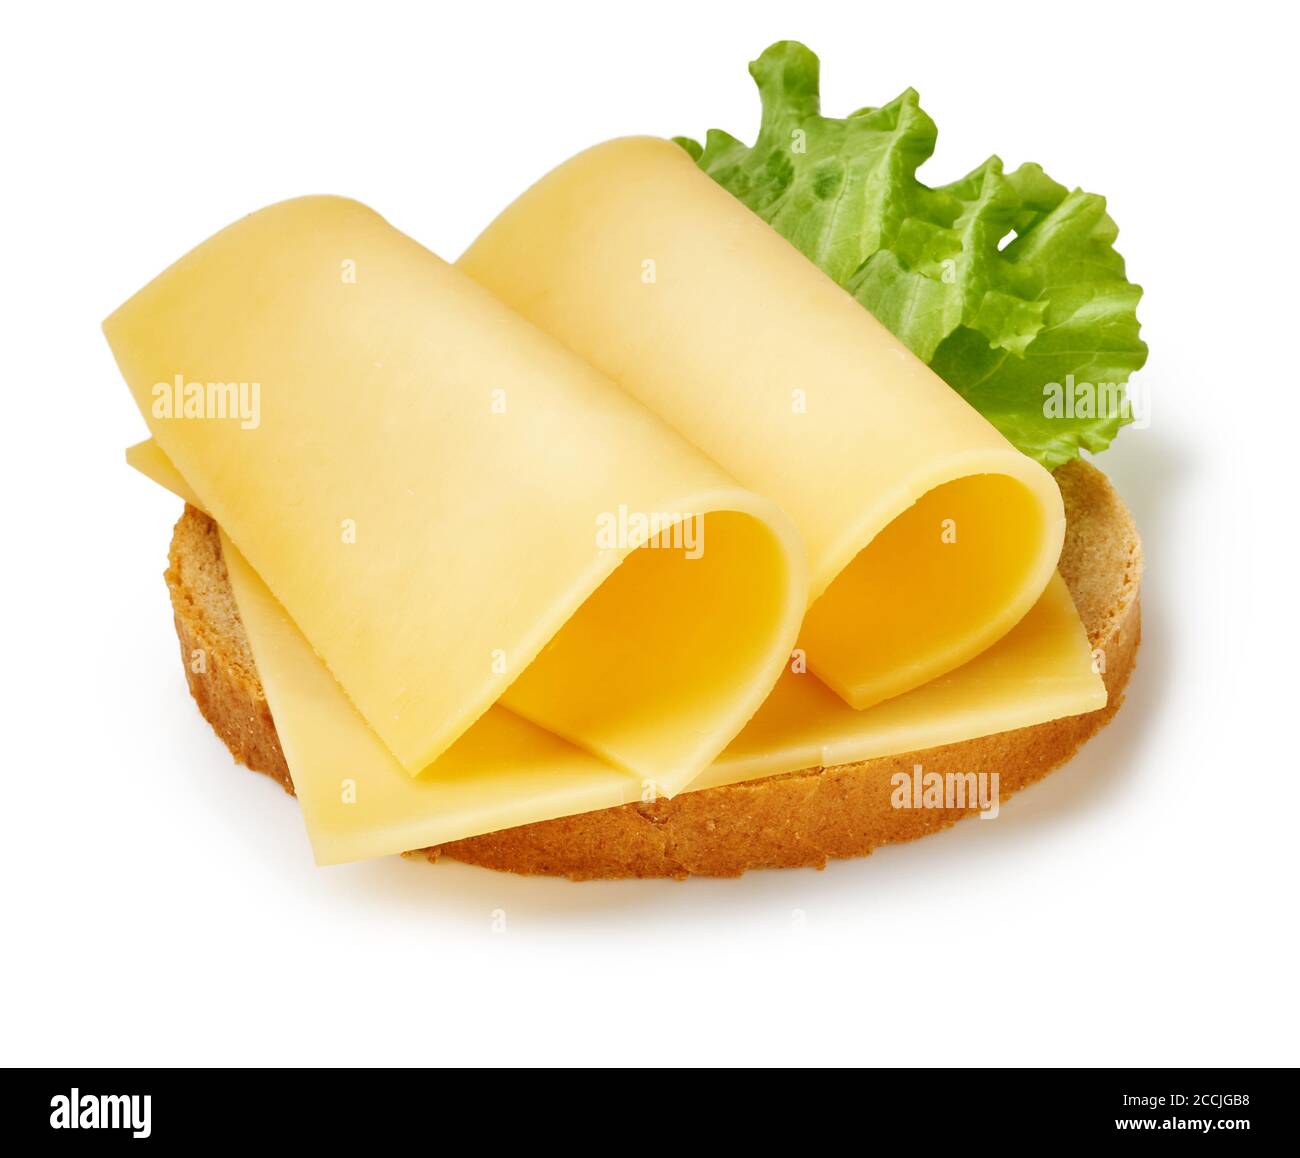 Cheese slices with salad leaf on piece of bread. Sandwich isolated on white background. Stock Photo